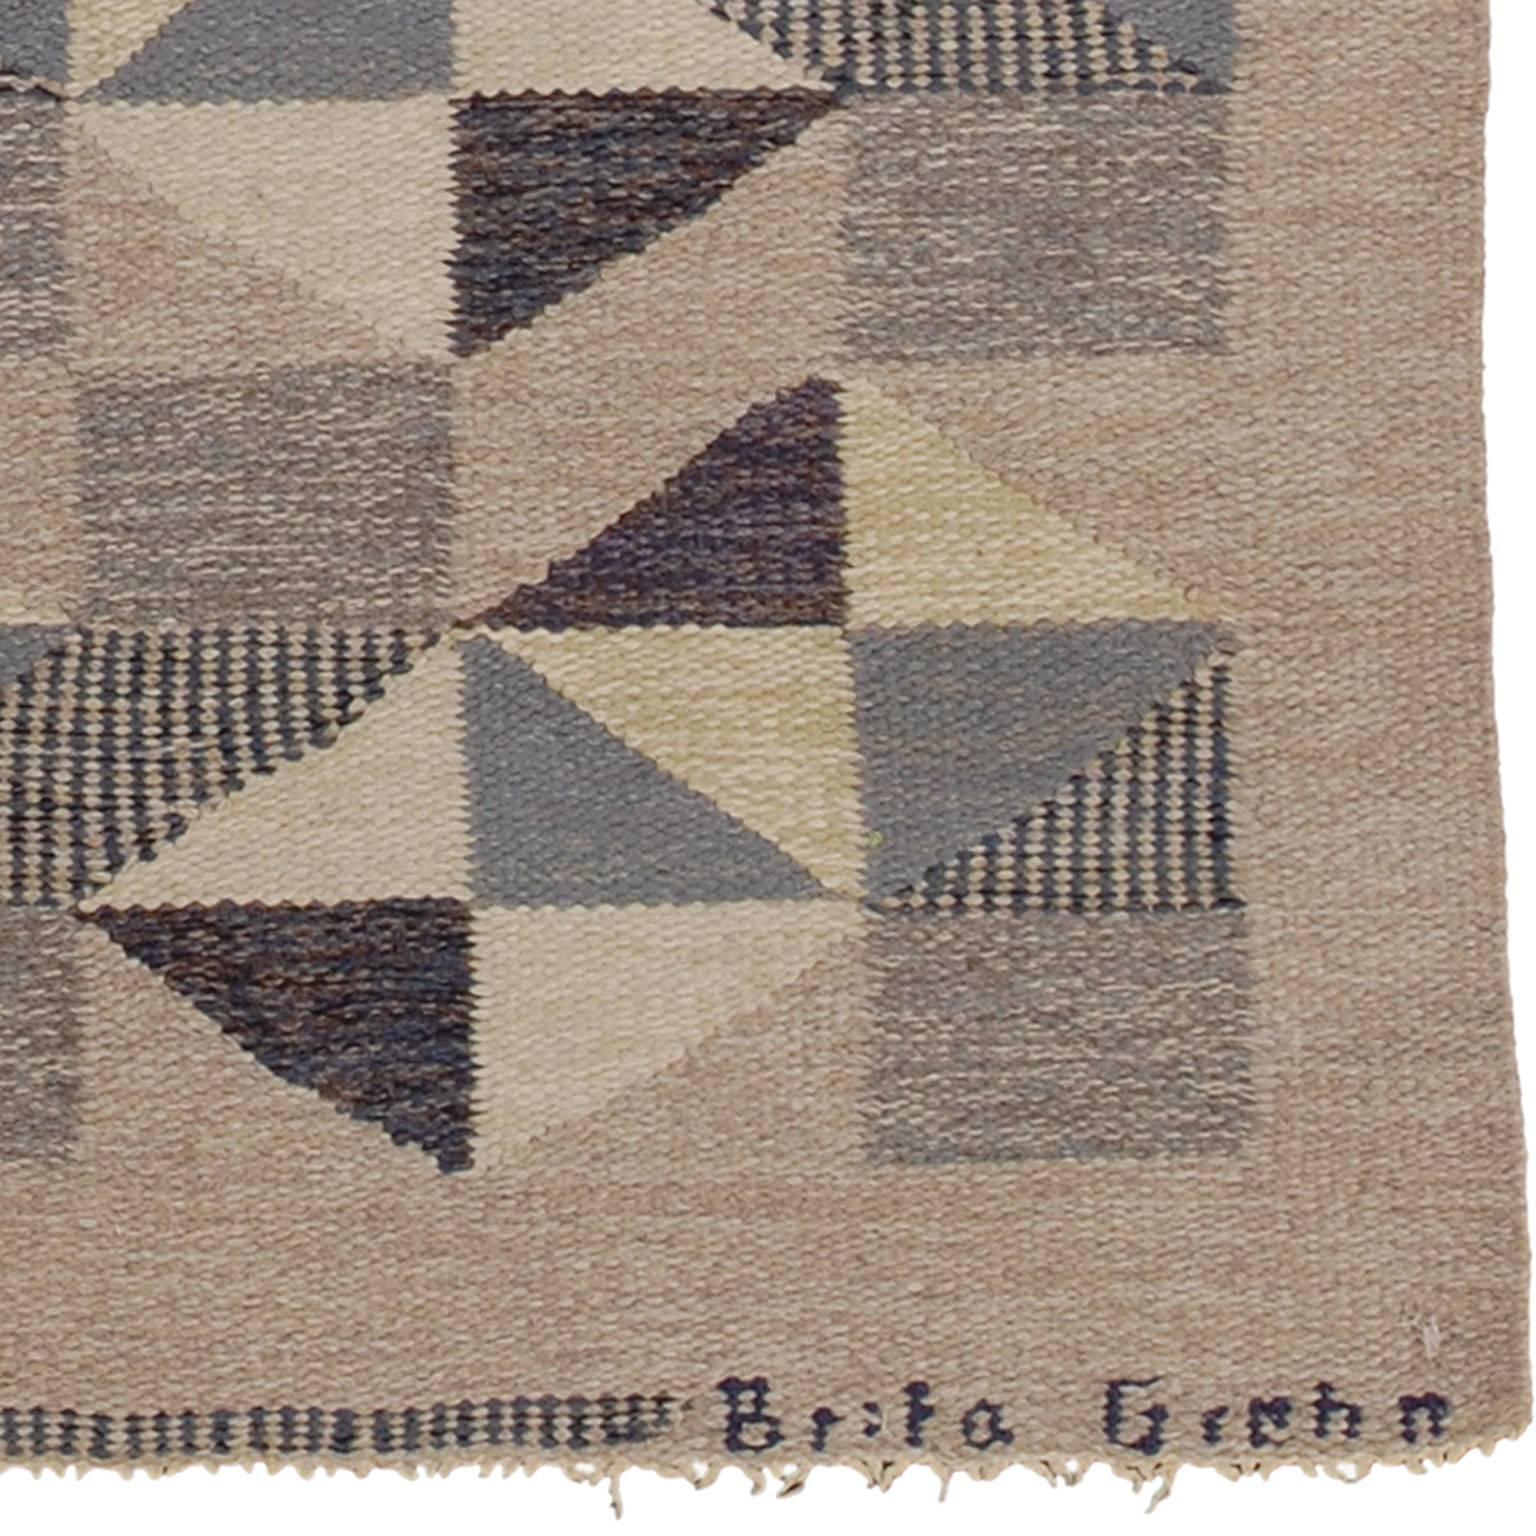 20th Century Swedish Flat-Weave Carpet In Good Condition For Sale In New York, NY